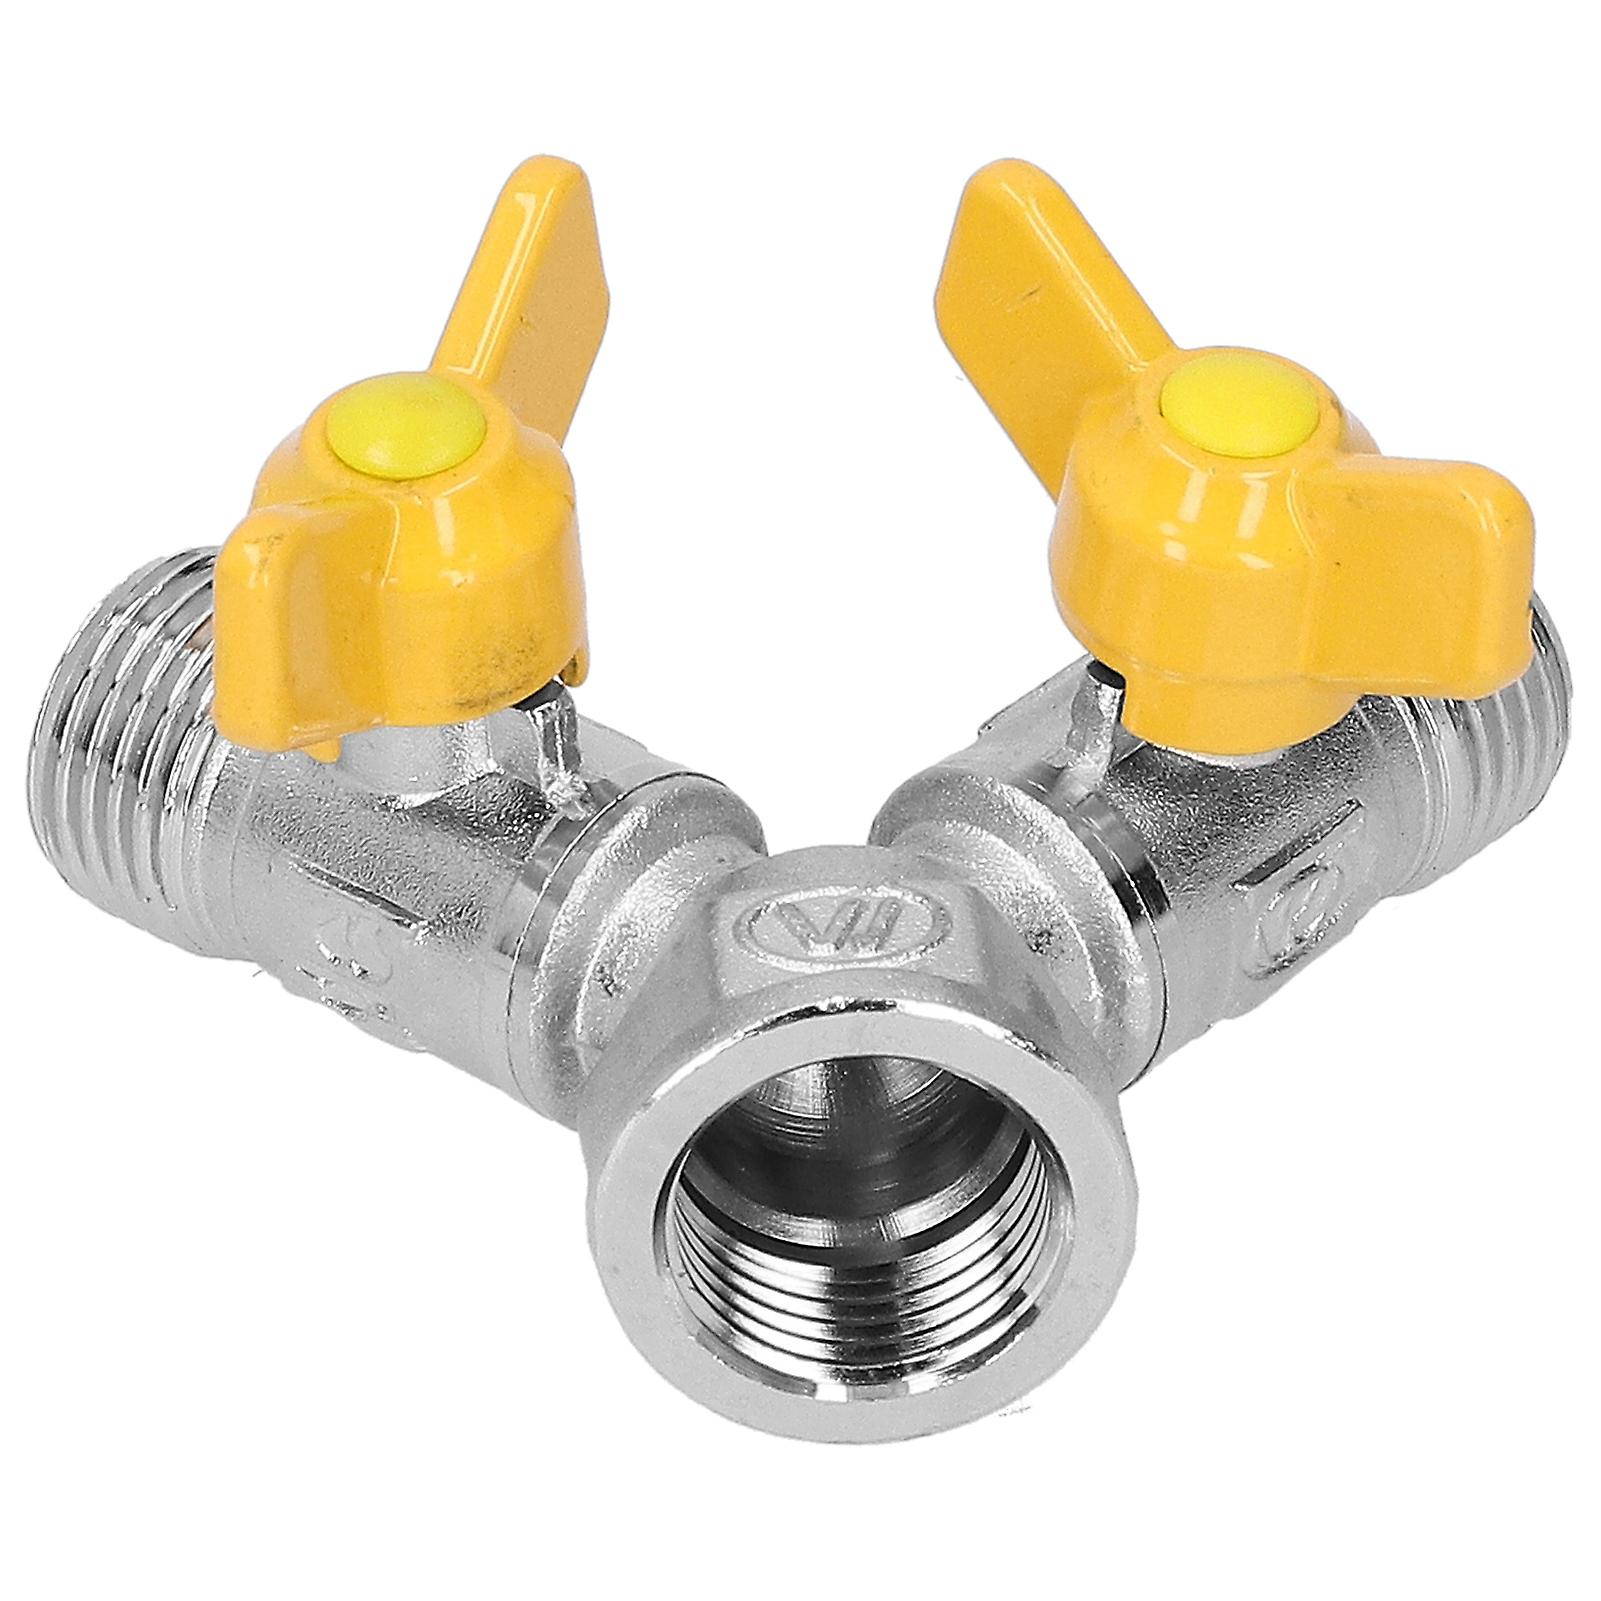 Female Thread G1/2 Ball Valve Faucet Adapter Brass Ytype Dualoutlet Automatic Watering Device